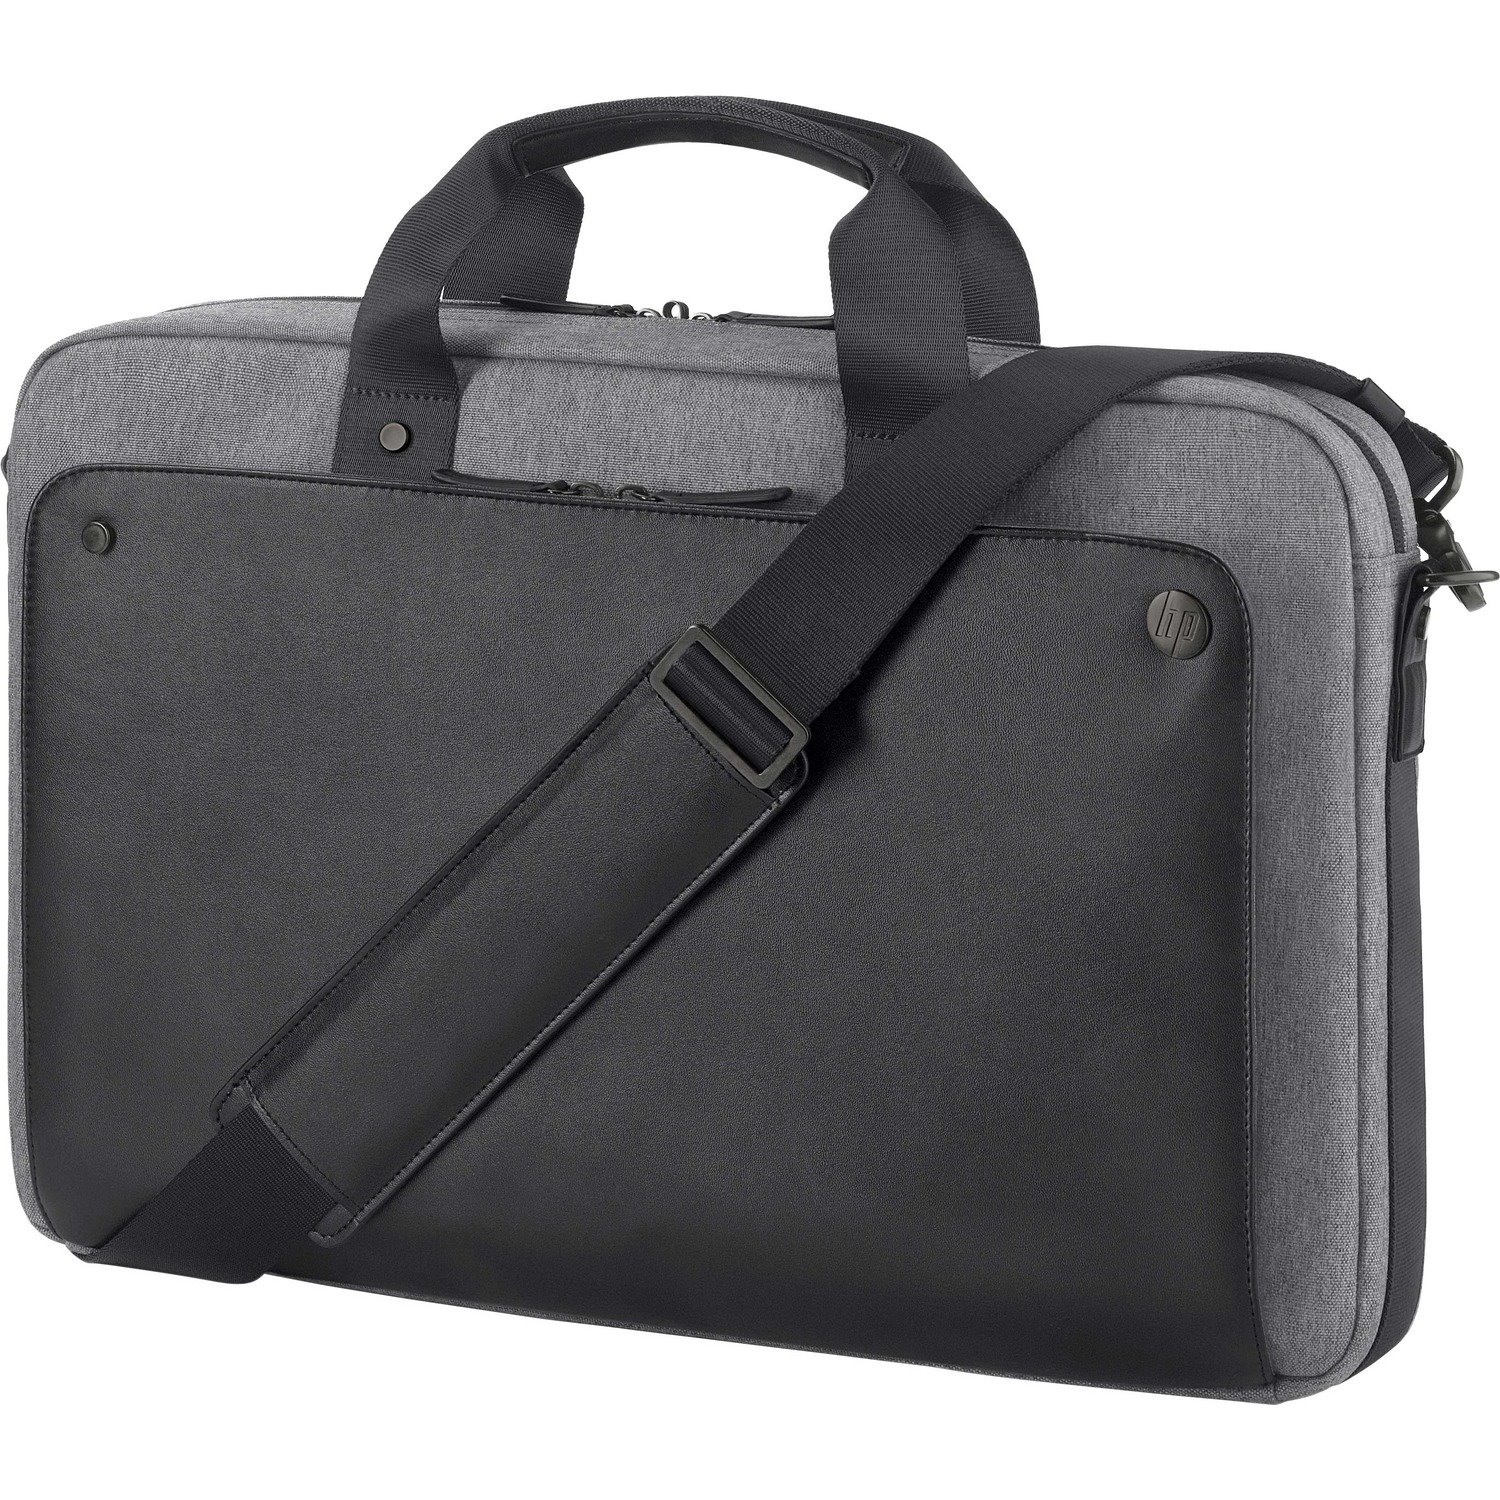 HP Executive Carrying Case for 39.6 cm (15.6") Notebook - Black